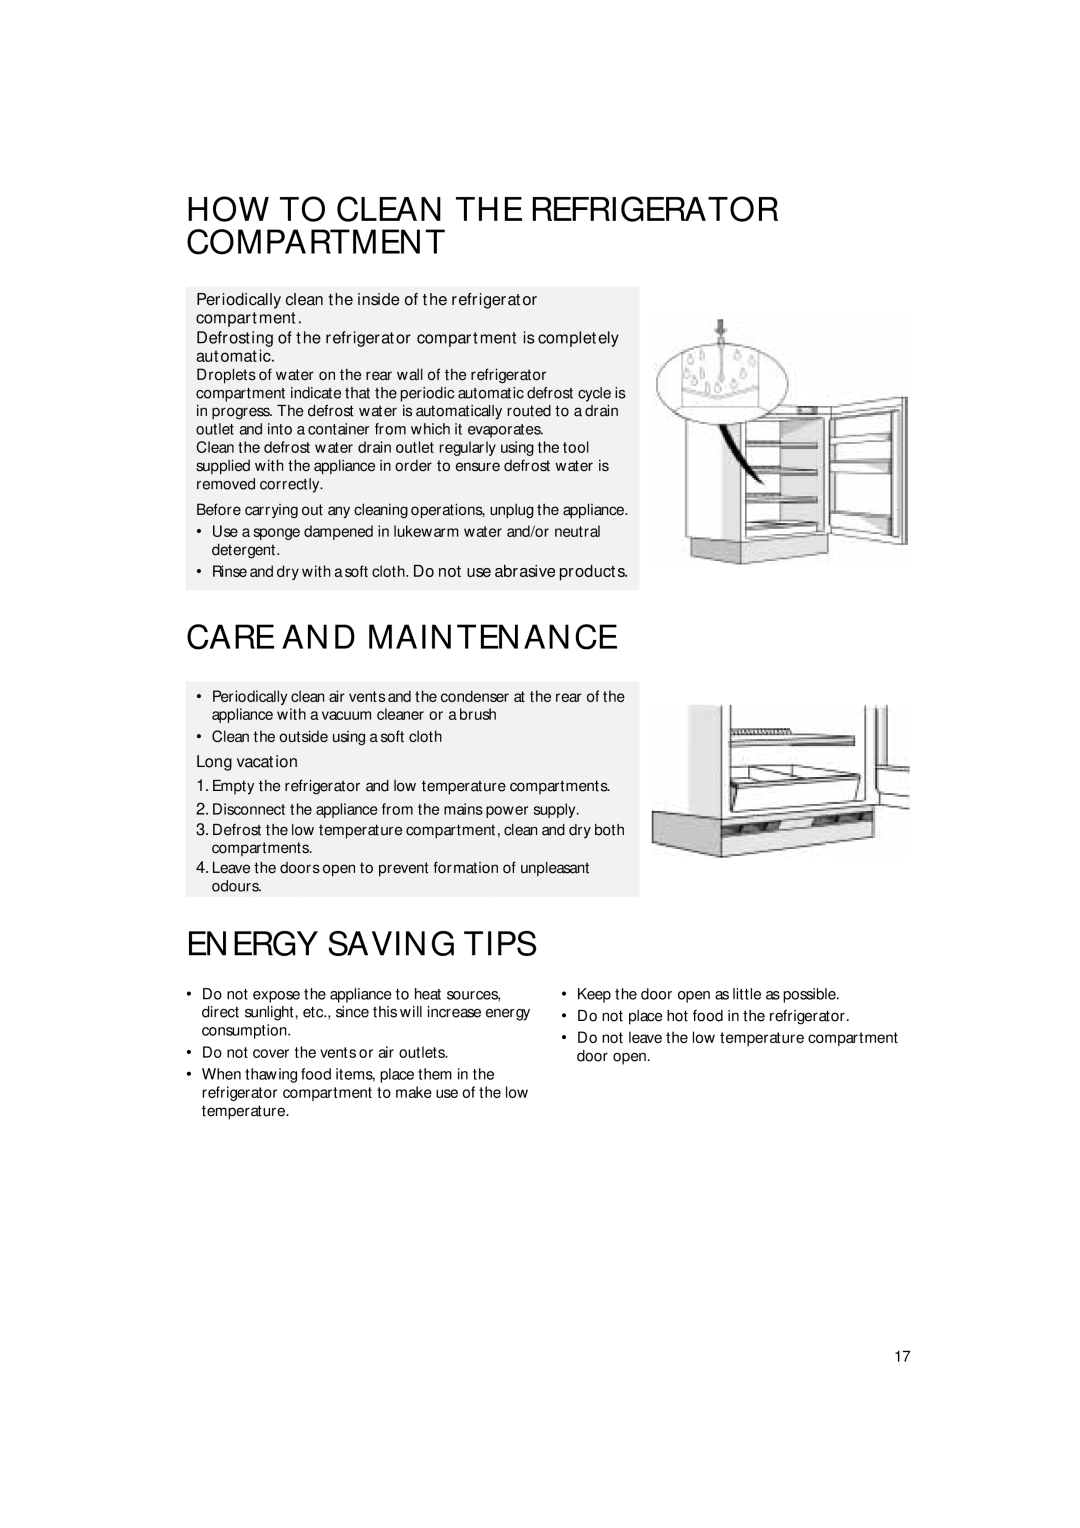 Smeg FR148A7, FR132A7 How To Clean The Refrigerator Compartment, Care And Maintenance, Energy Saving Tips, Long vacation 